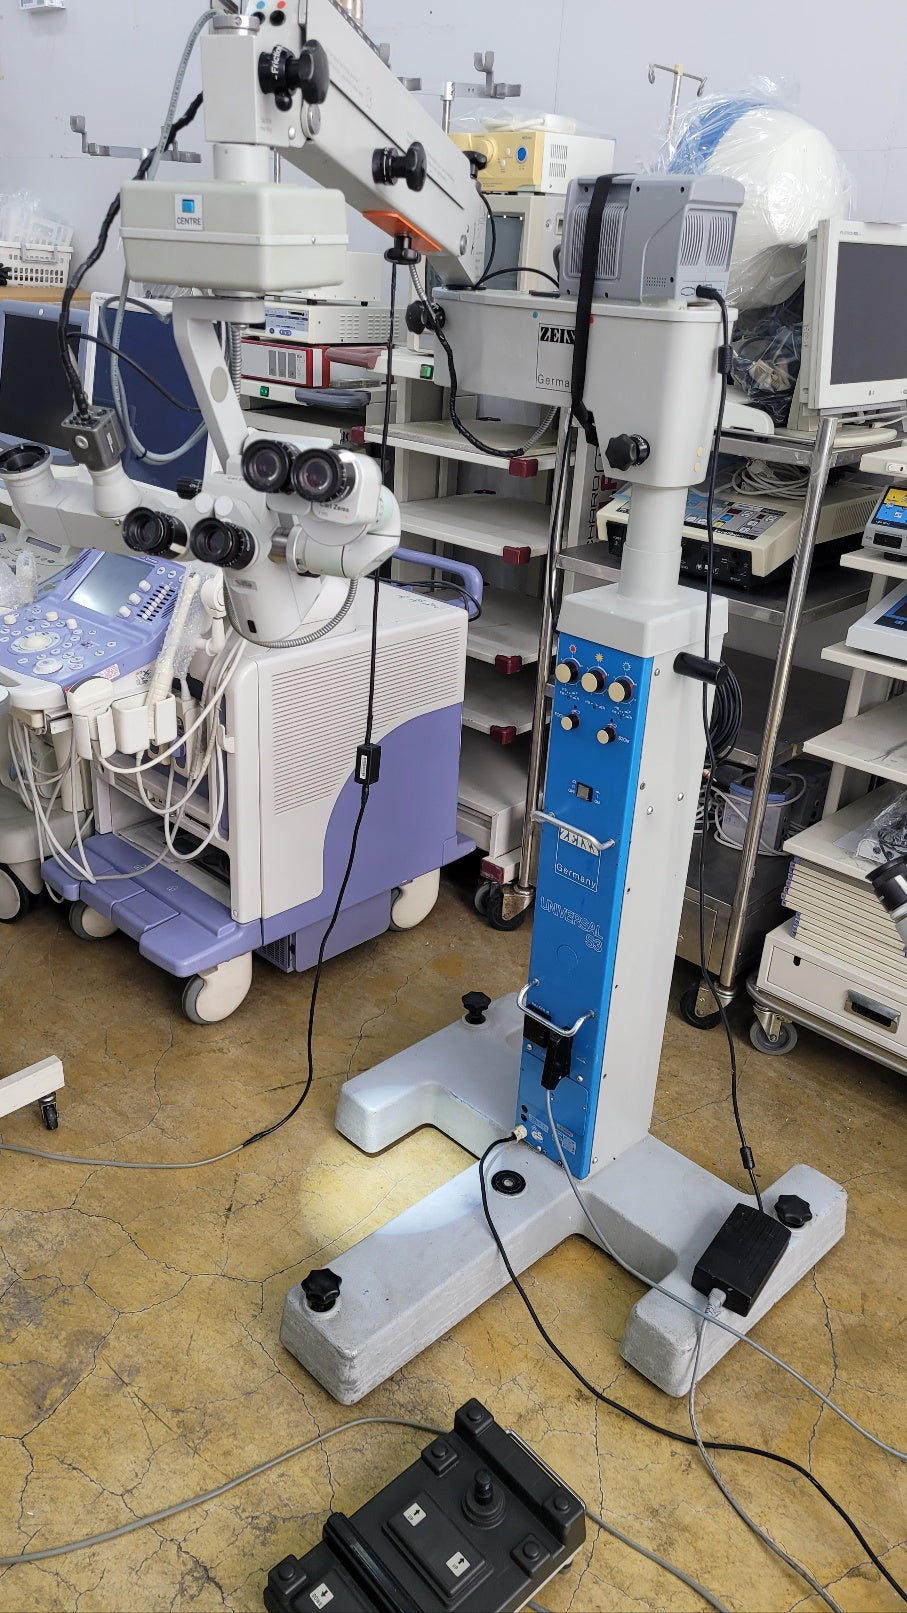 WorldWide Selling on Used ZEISS Universal S3 F 170 OPMI 6-CFR XY OP-SL on Stand Microscope Used Opthalmic Medical Equipment